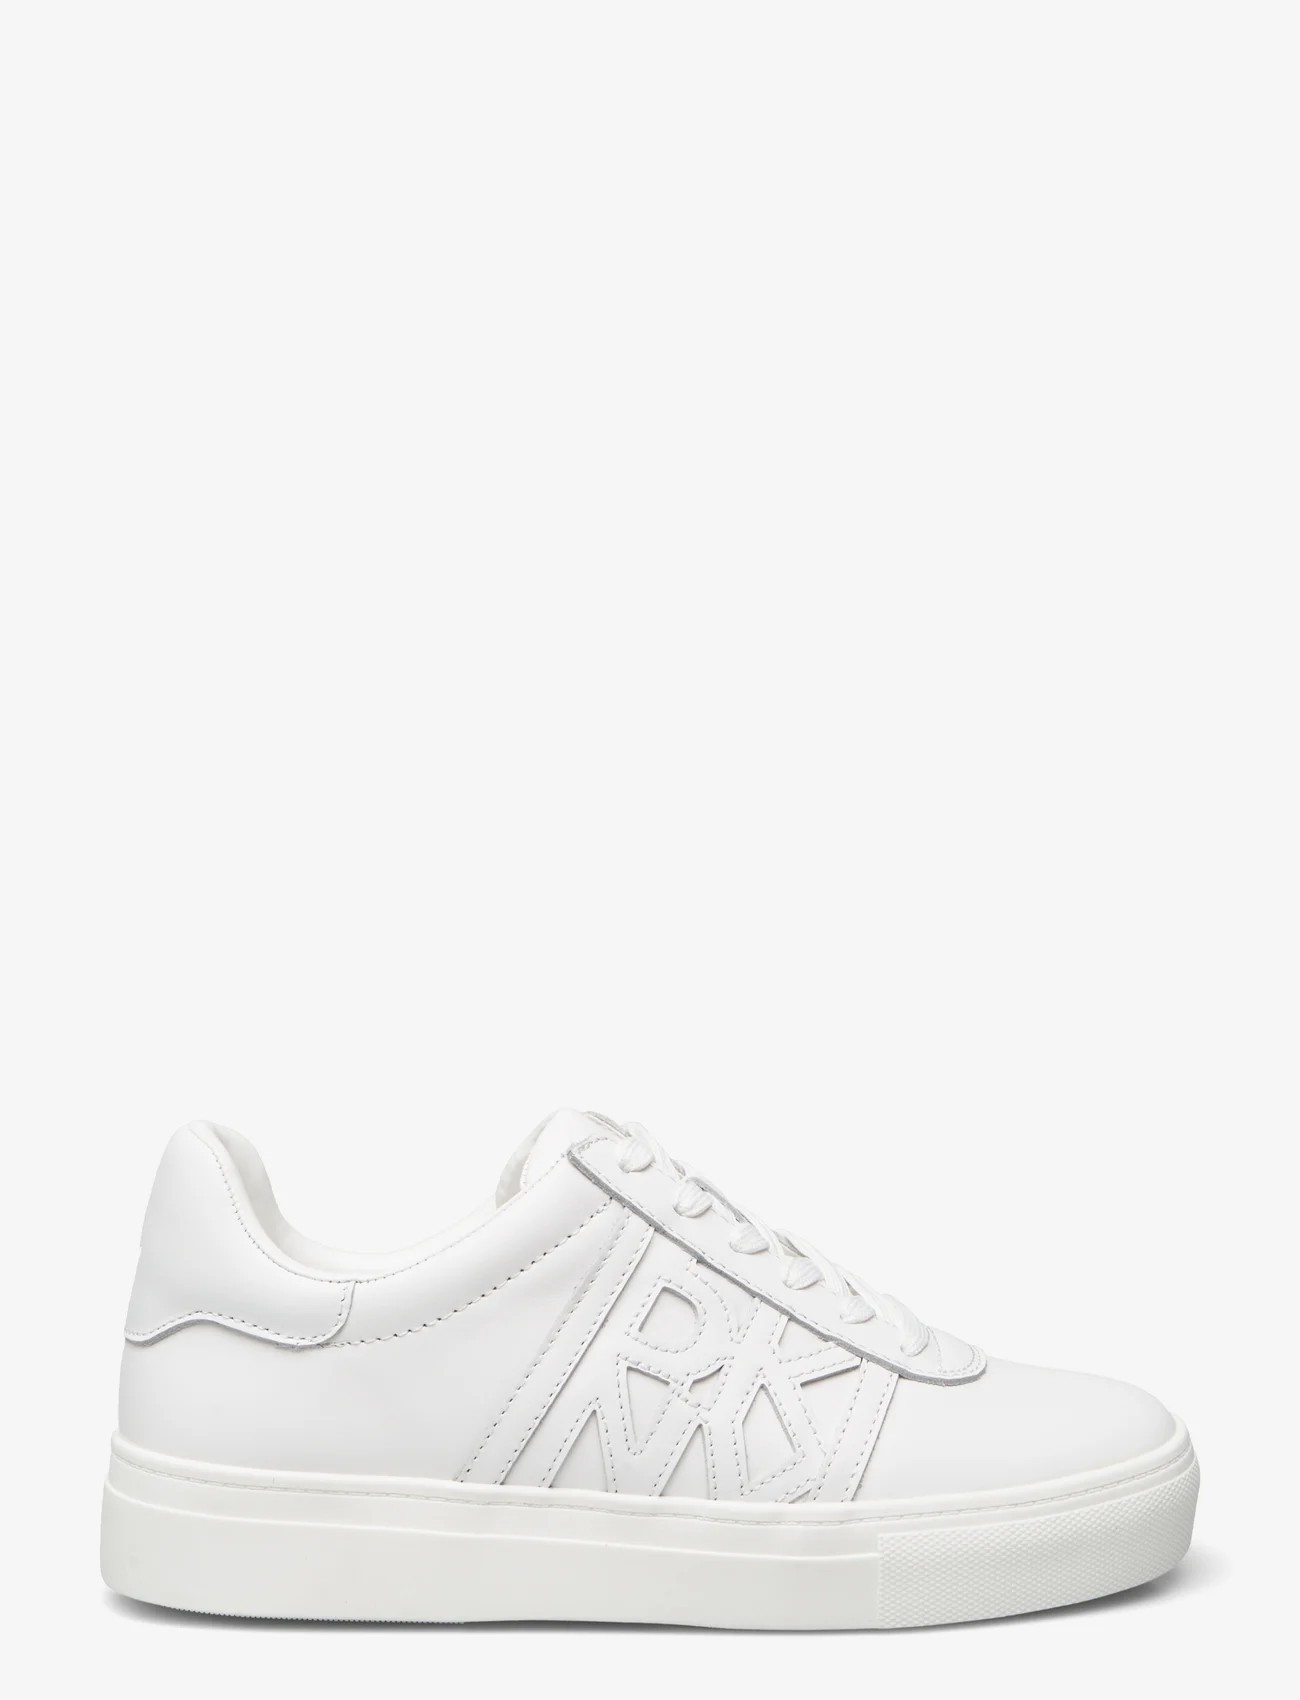 DKNY - JENNIFER - LACE UP S - lage sneakers - 8iw - brt white - 1